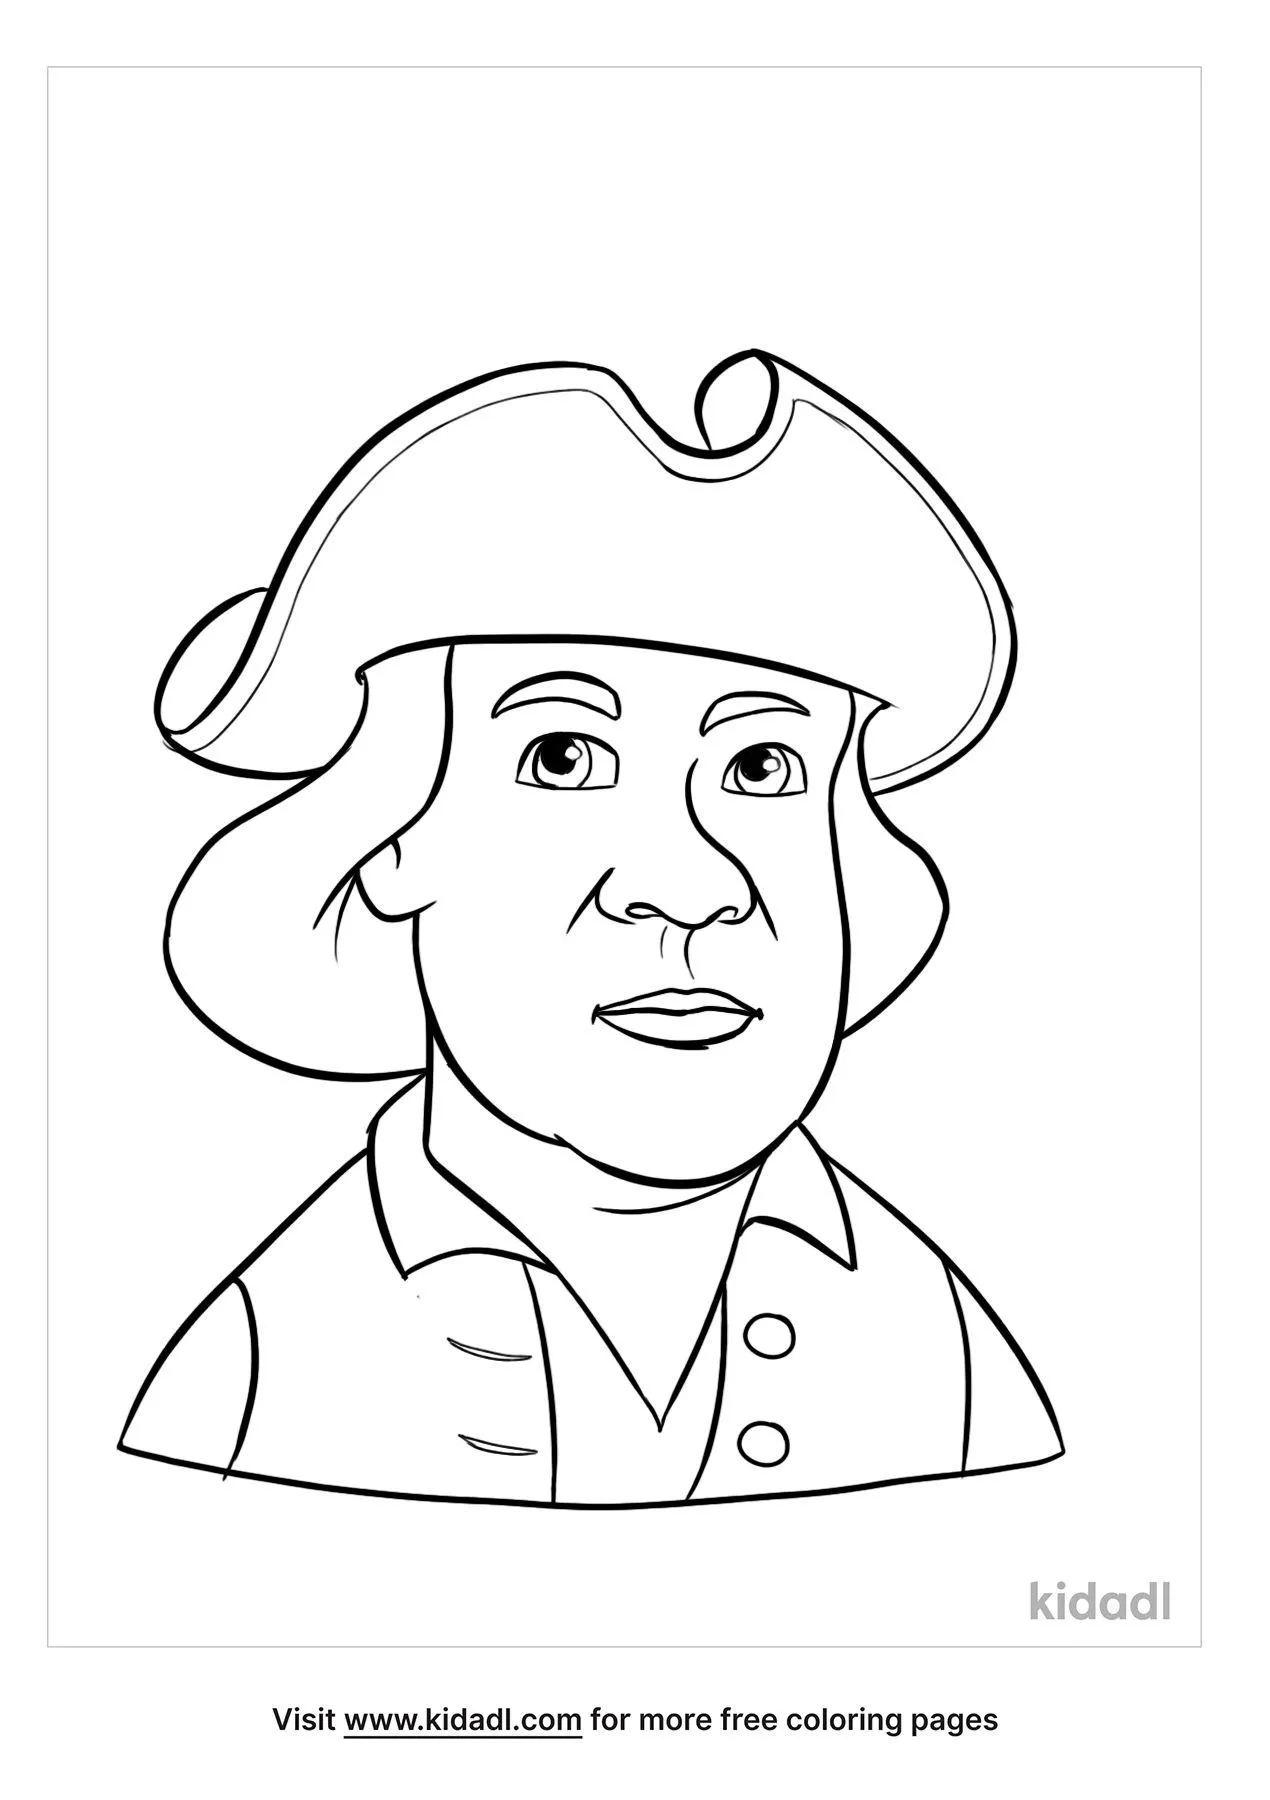 Free Paul Revere Coloring Page | Coloring Page Printables | Kidadl